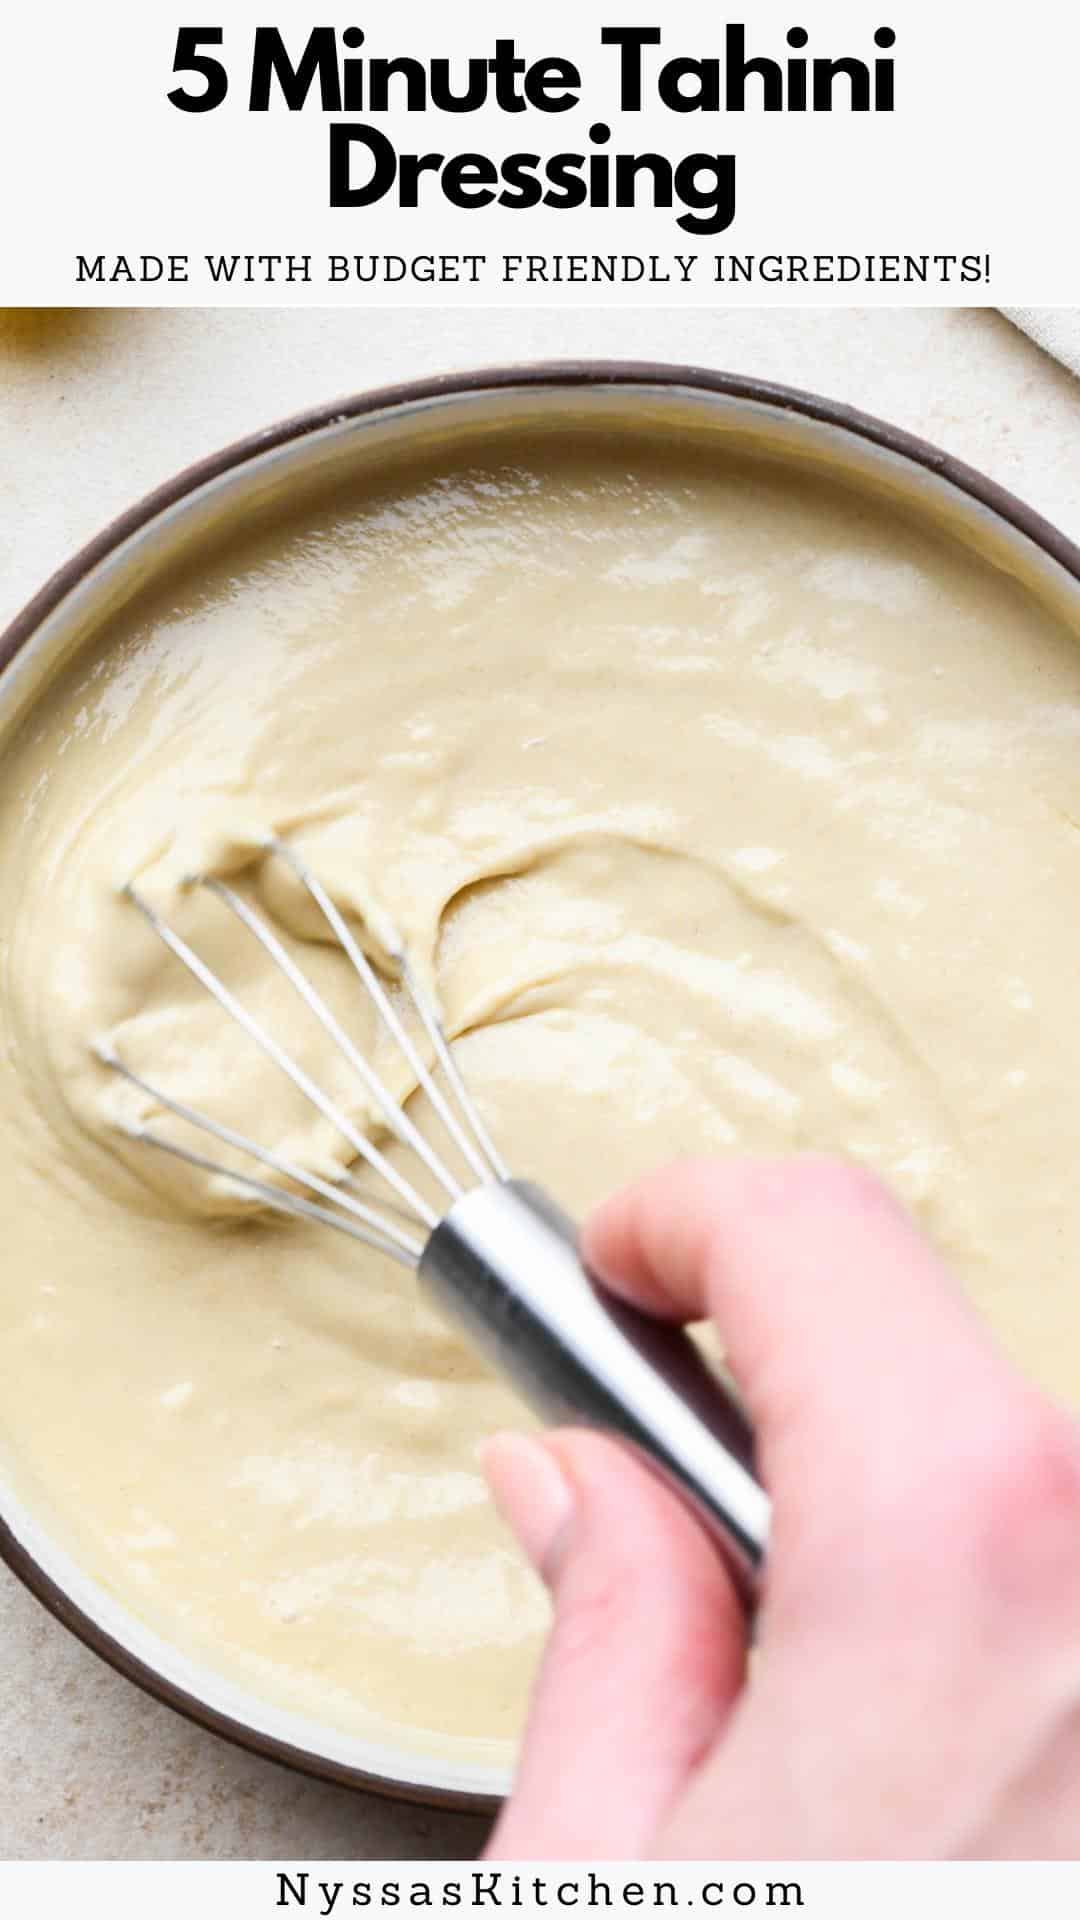 This creamy, easy-to-make tahini dressing is the new homemade sauce recipe you'll love having in your back pocket! Bright and nutty, it's the perfect addition to salads, grain bowls, roasted vegetables, or a simple protein. Gluten free, vegan option, Whole30 option.